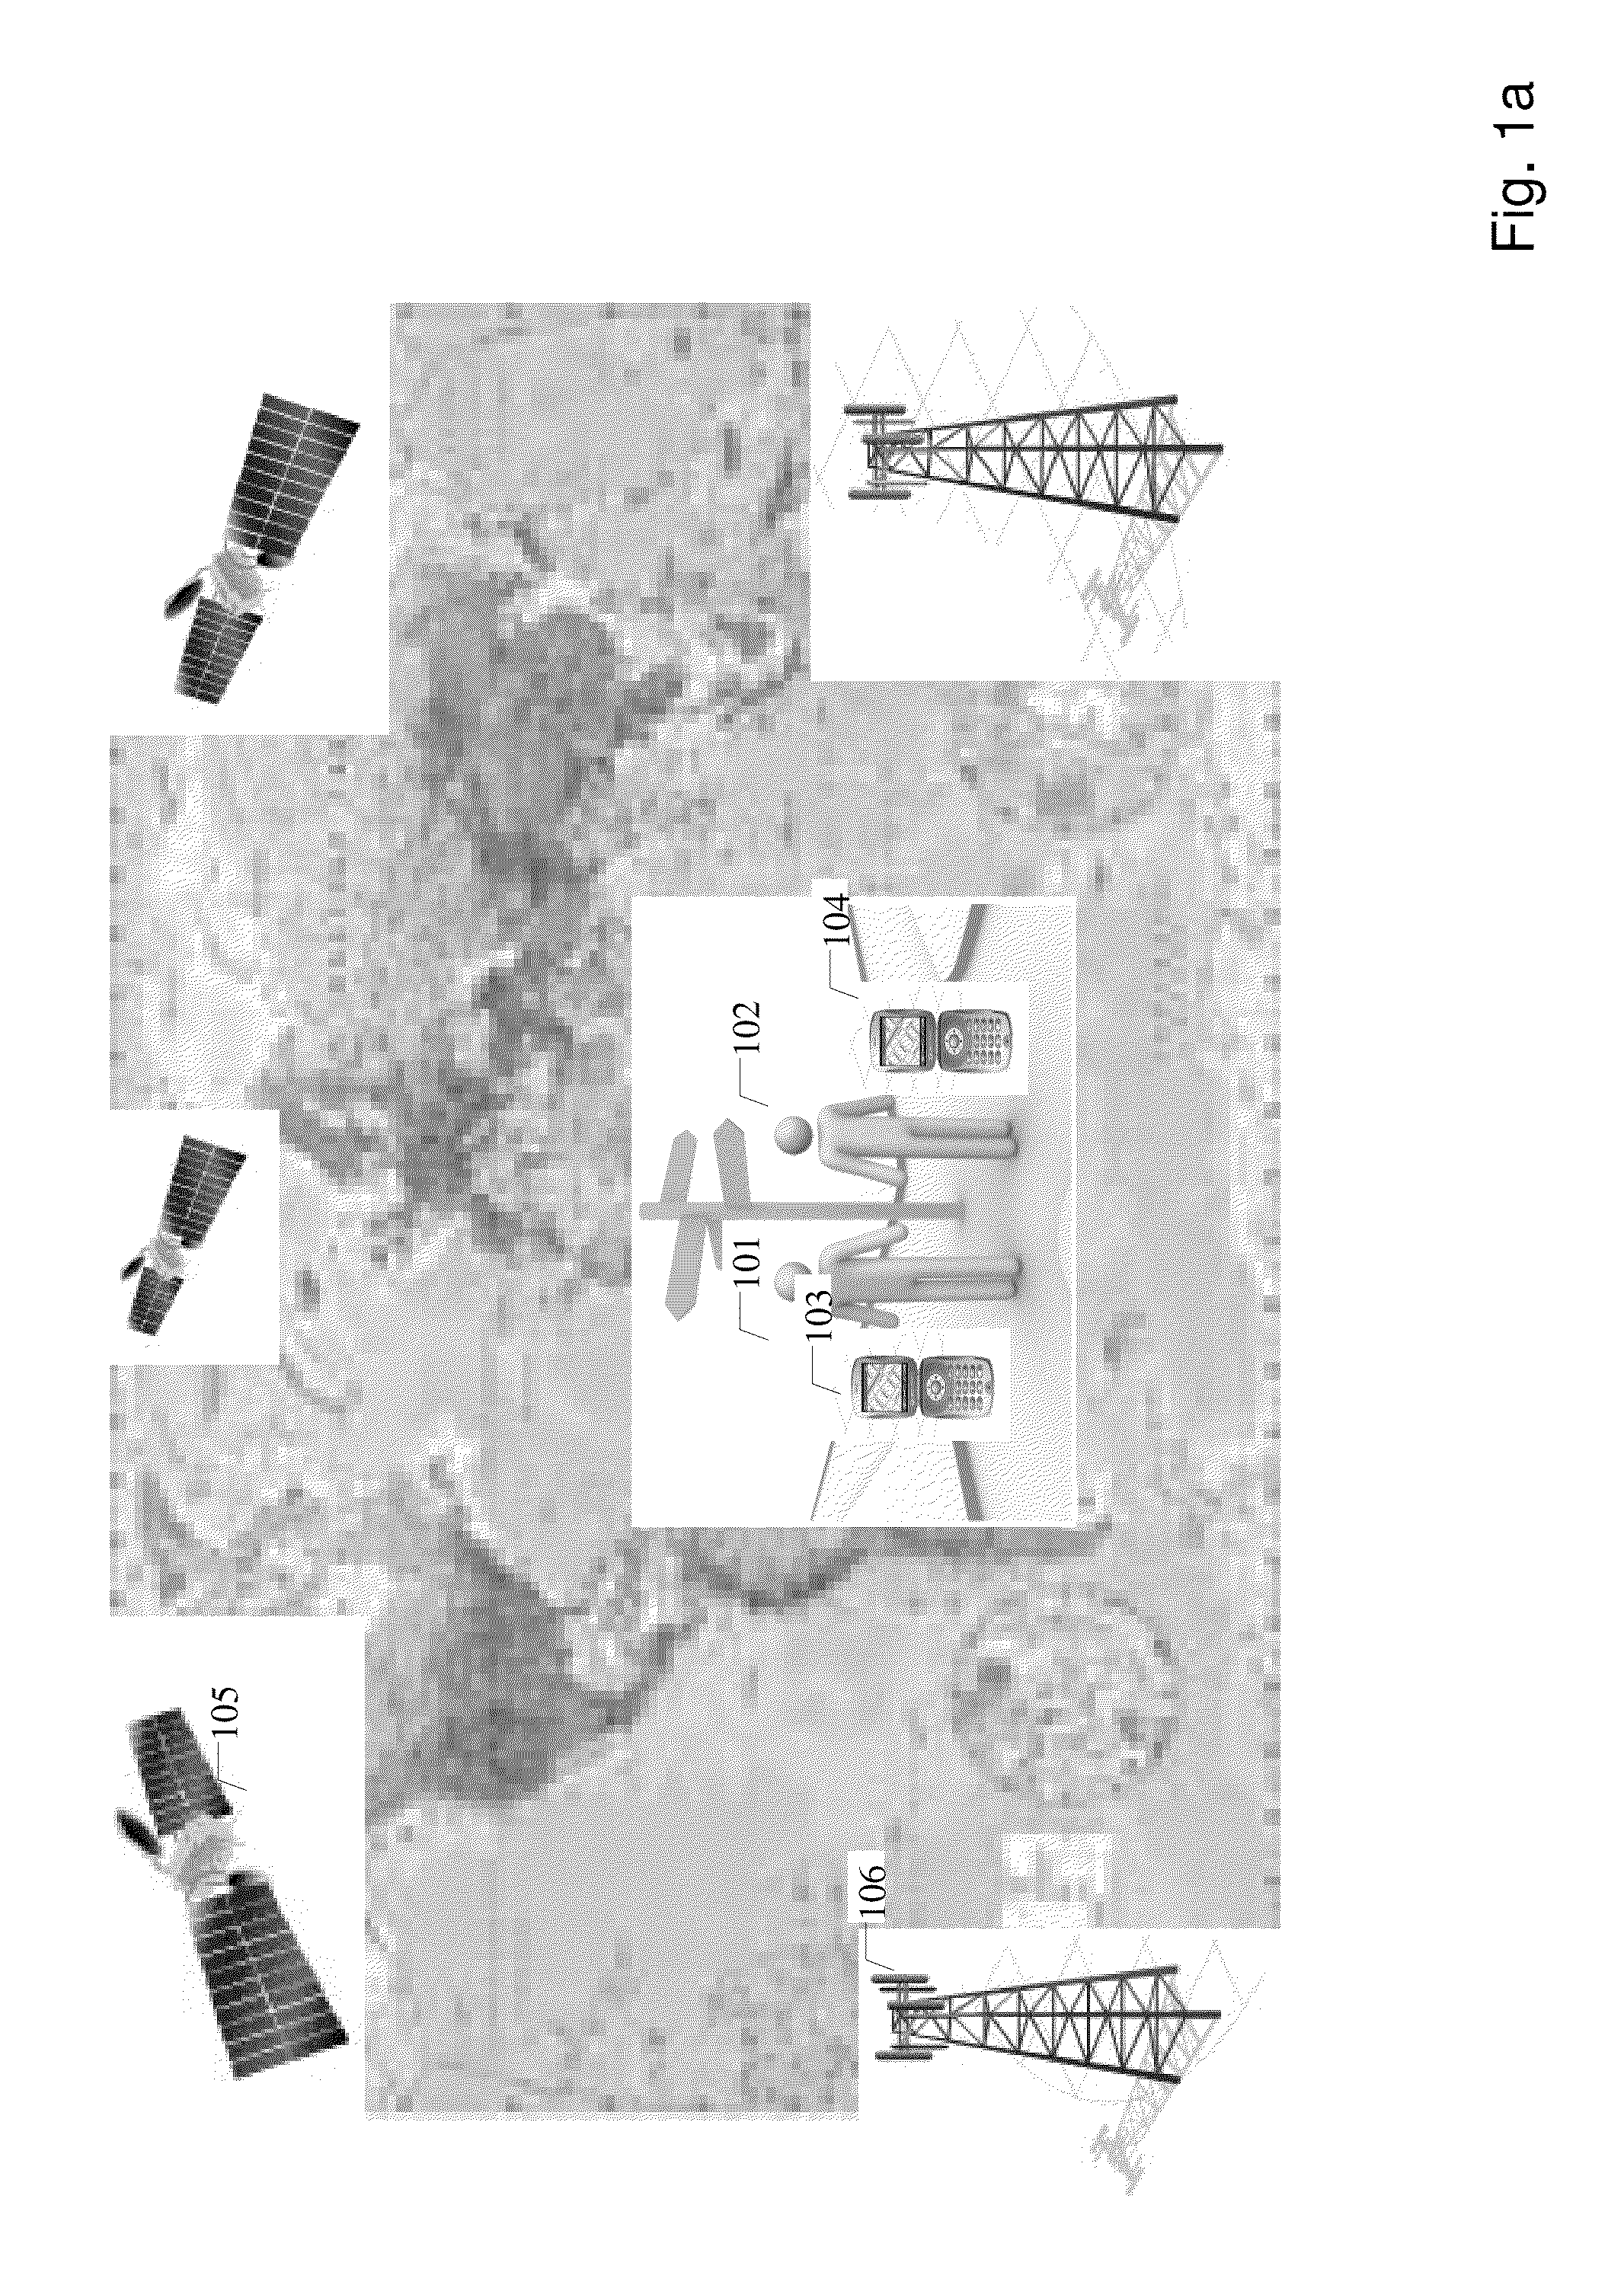 System and methods of location based service for people interaction